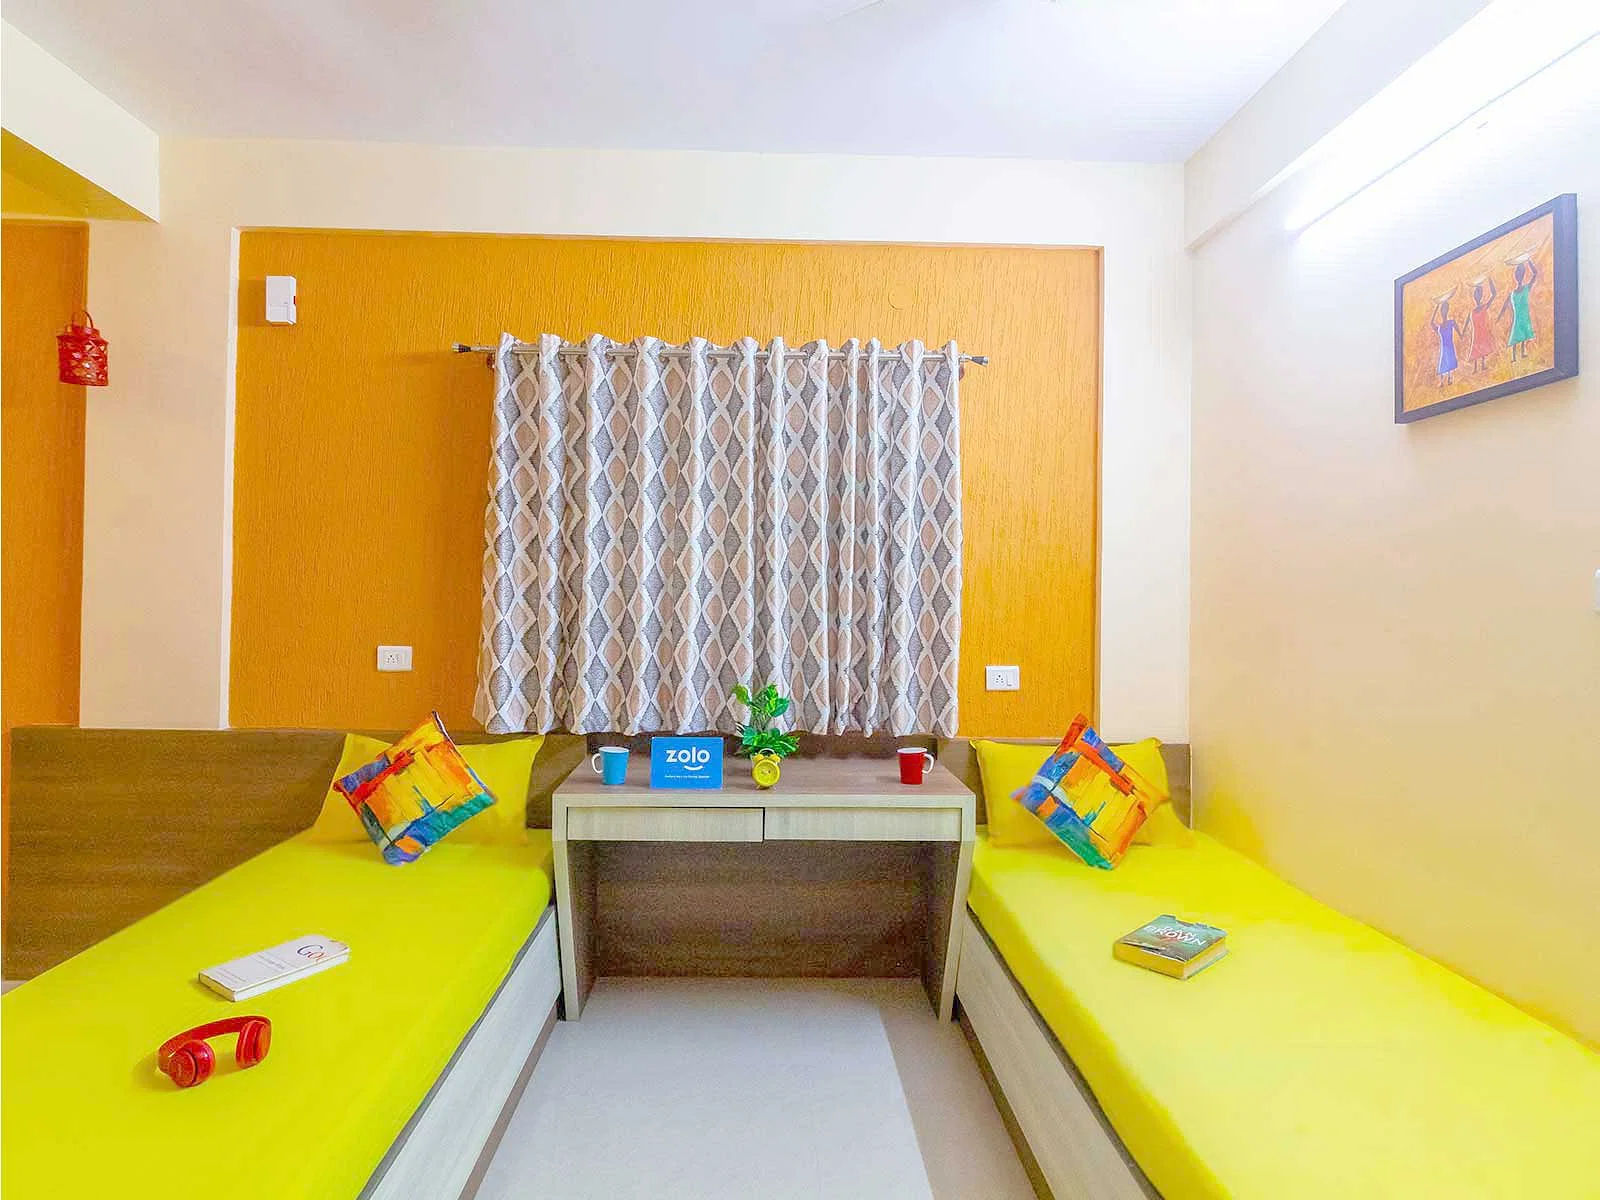 Fully furnished single/sharing rooms for rent in Bannerghatta Road with no brokerage-apply fast-Zolo Heaven